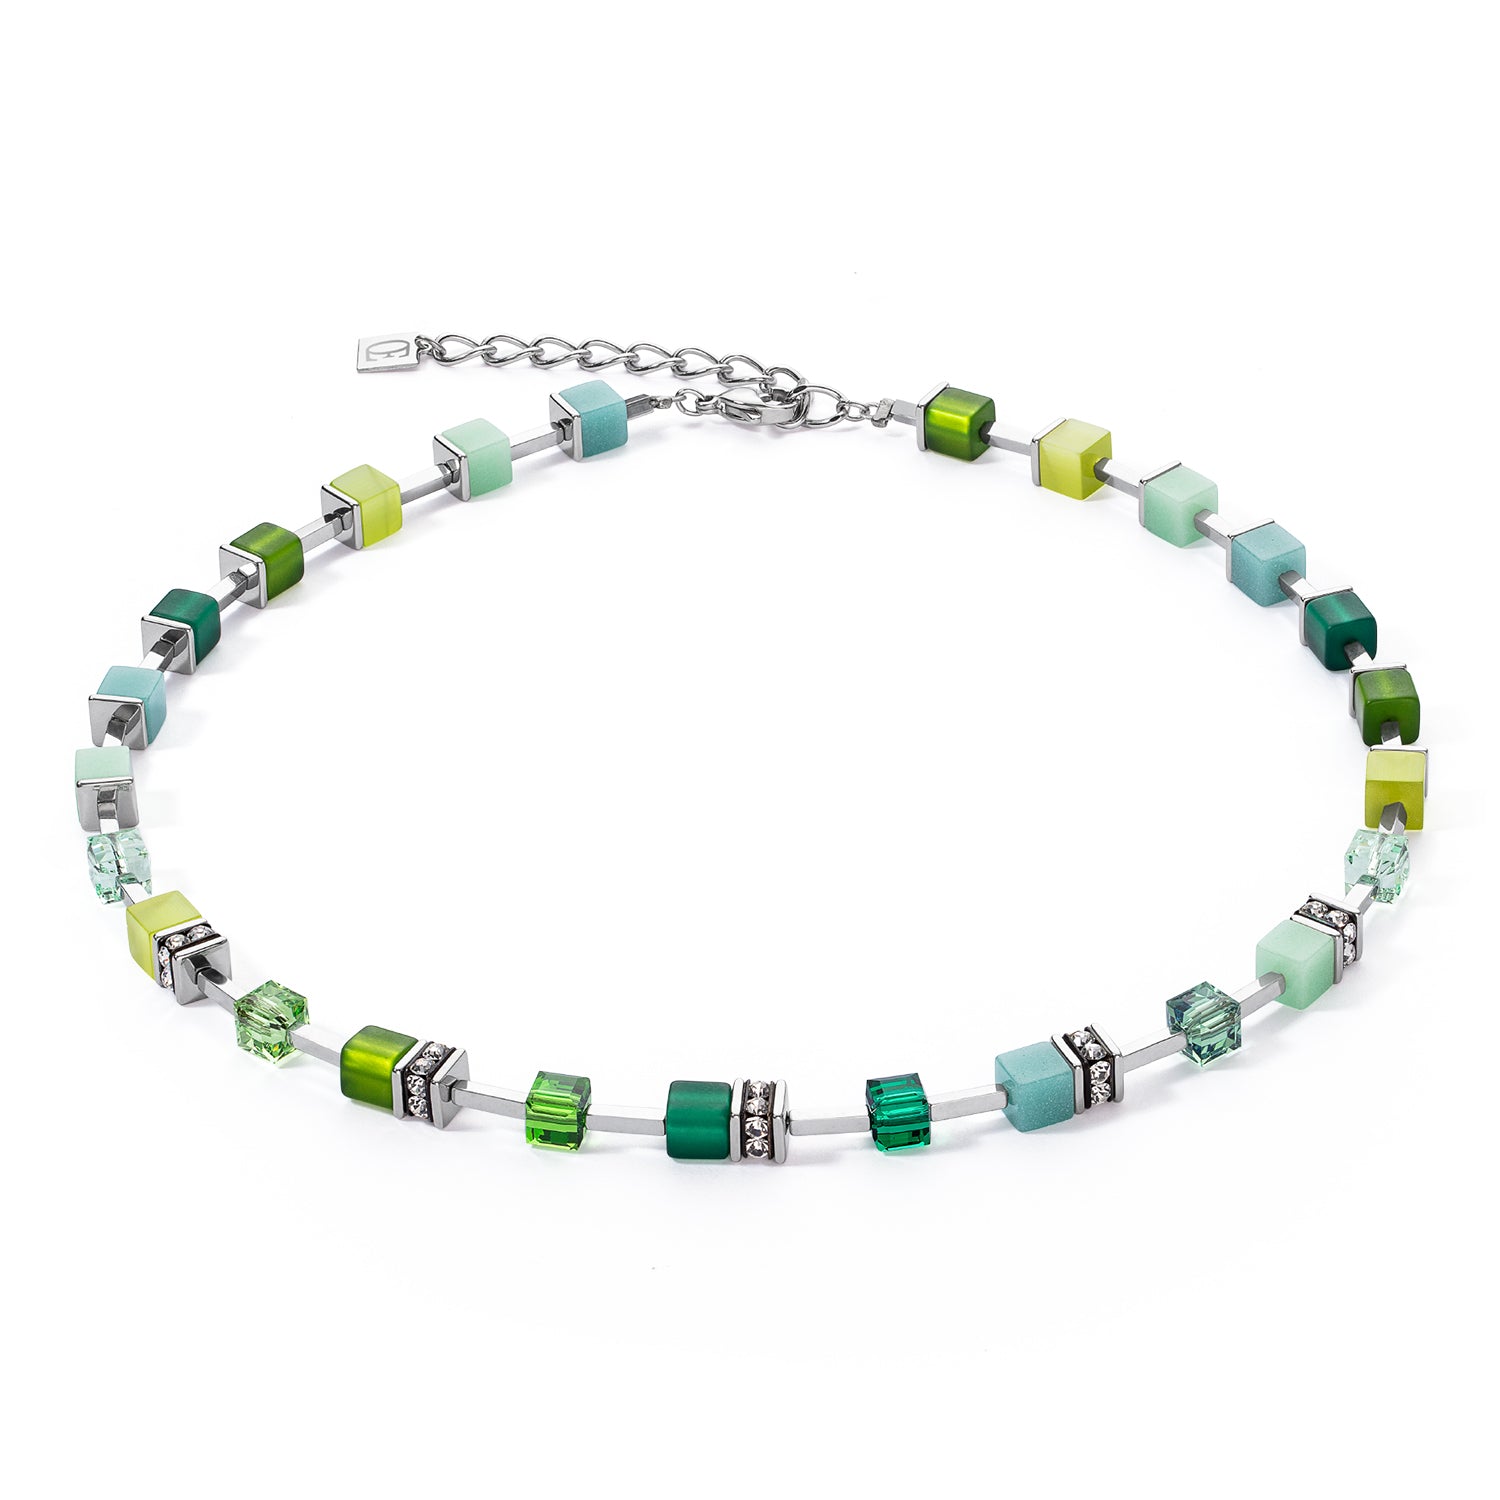 GeoCube Vibrant Green, Teal & Silver Necklace 2700/10_0500